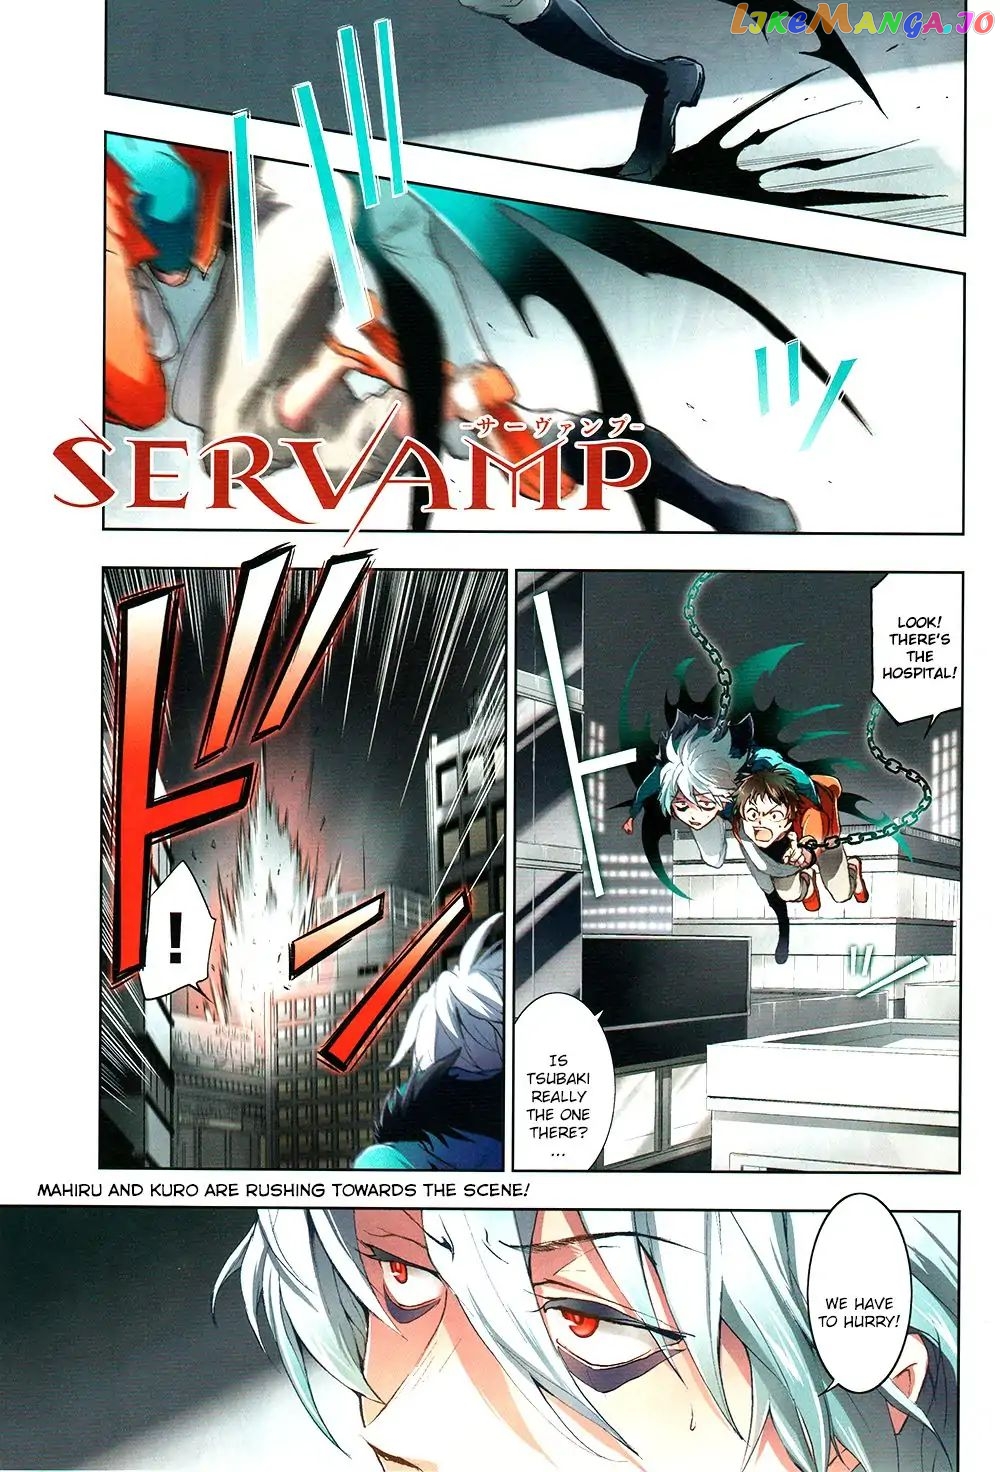 Servamp chapter 85 - page 1